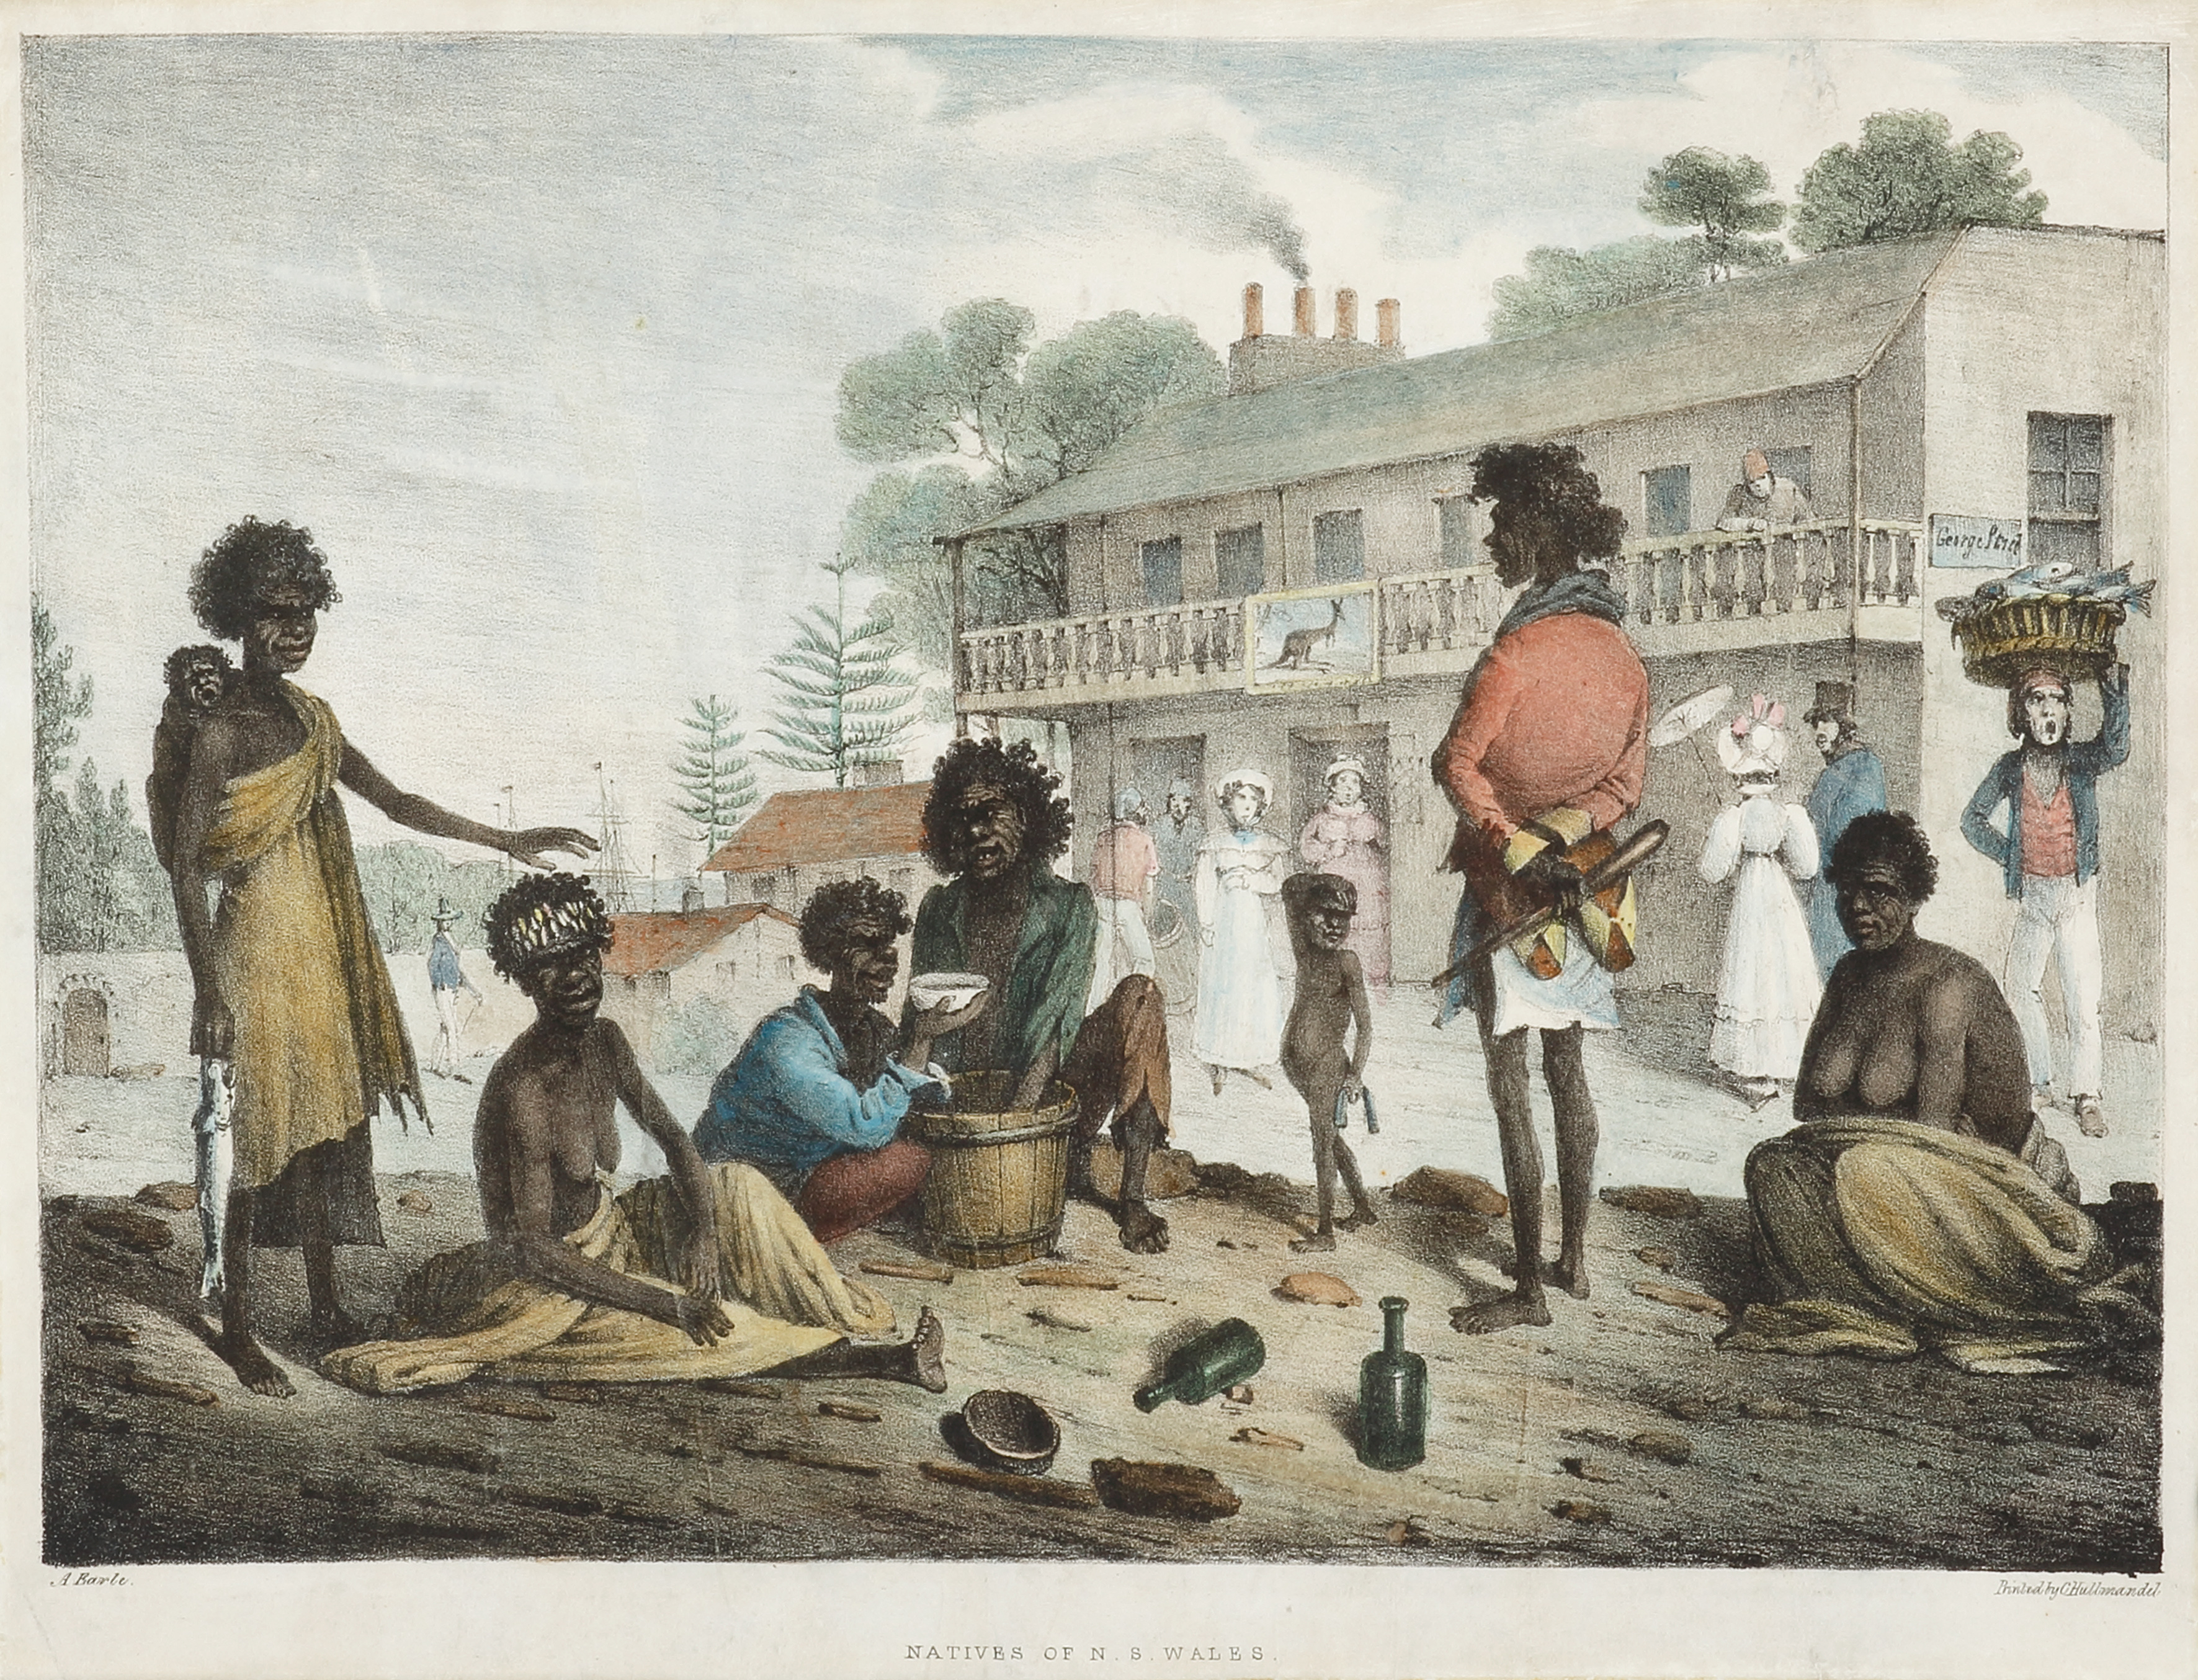 Natives of N.S. Wales, as seen in the streets of Sydney. NSW - Sydney